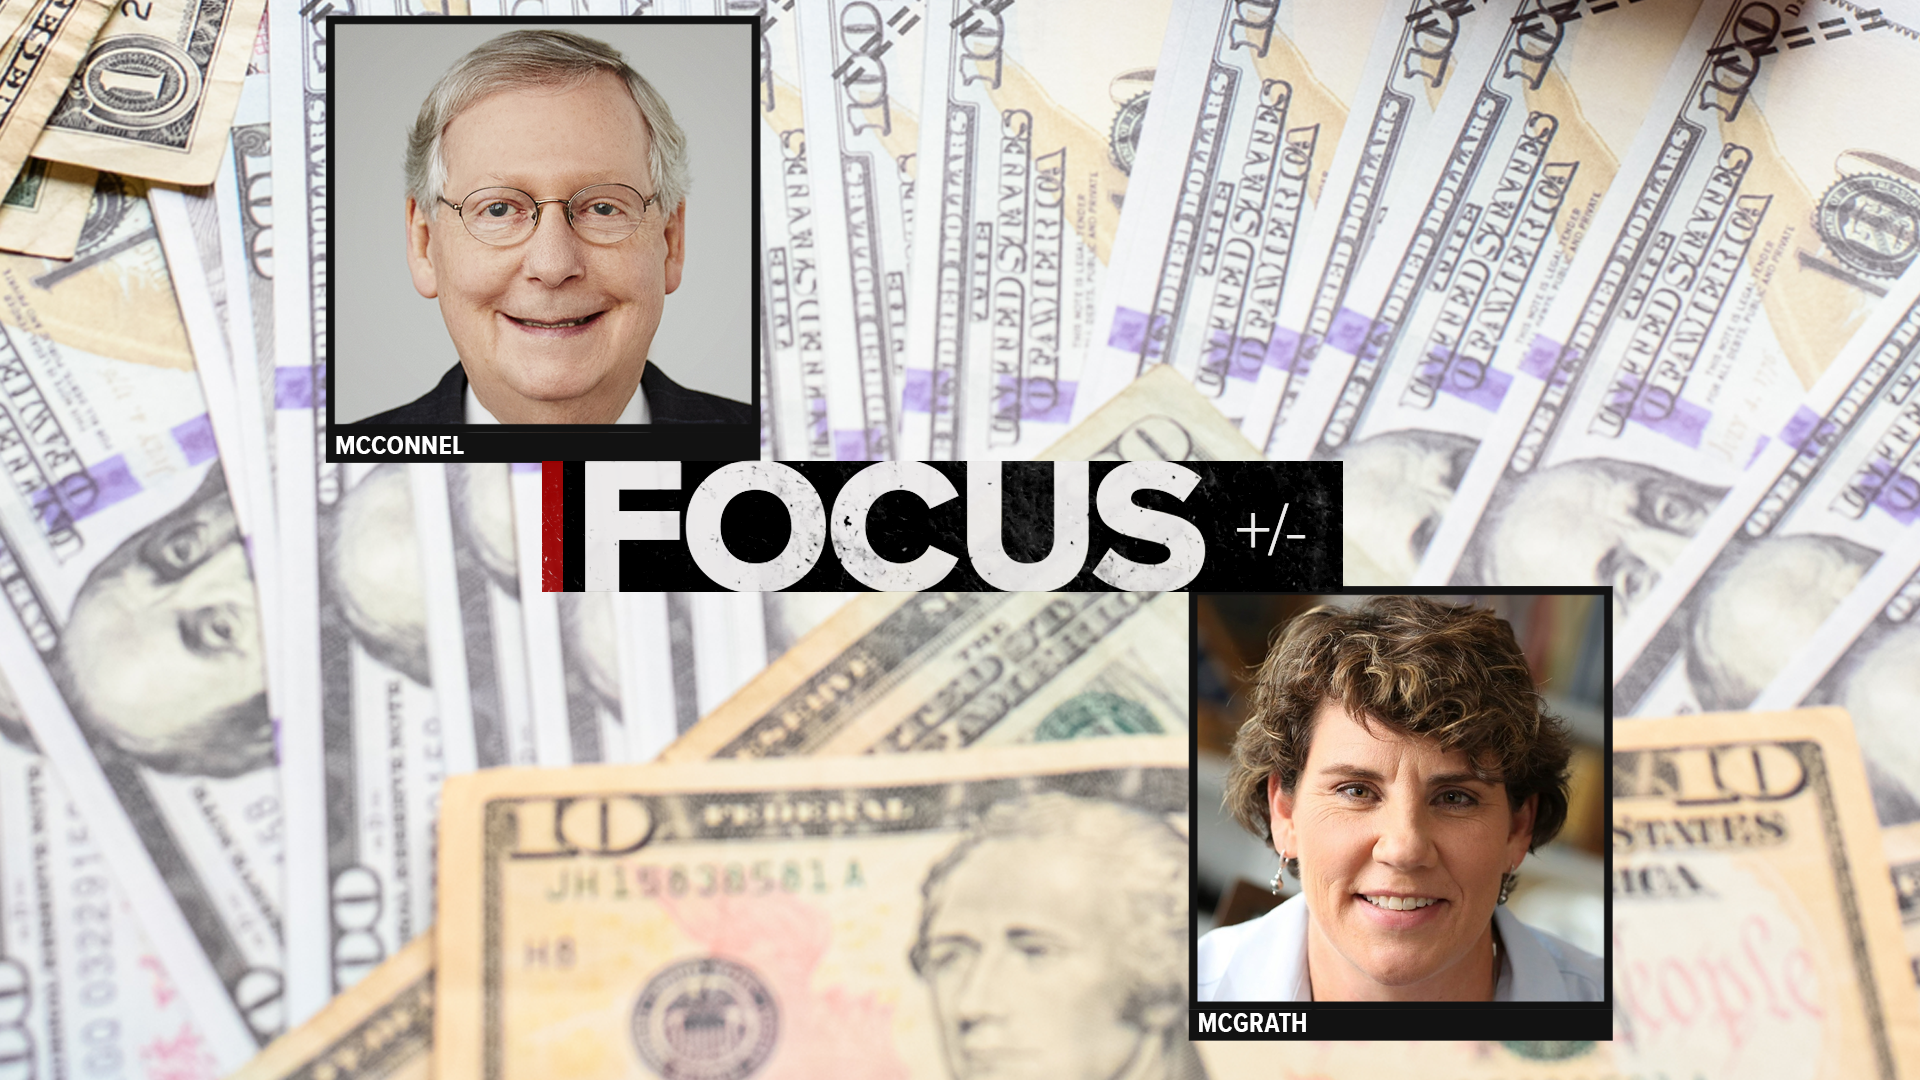 Sen. Majority Leader Mitch McConnell is seeking reelection for a 7th term, while former Marine pilot Amy McGrath hopes to pull off the upset. Both are spending big.